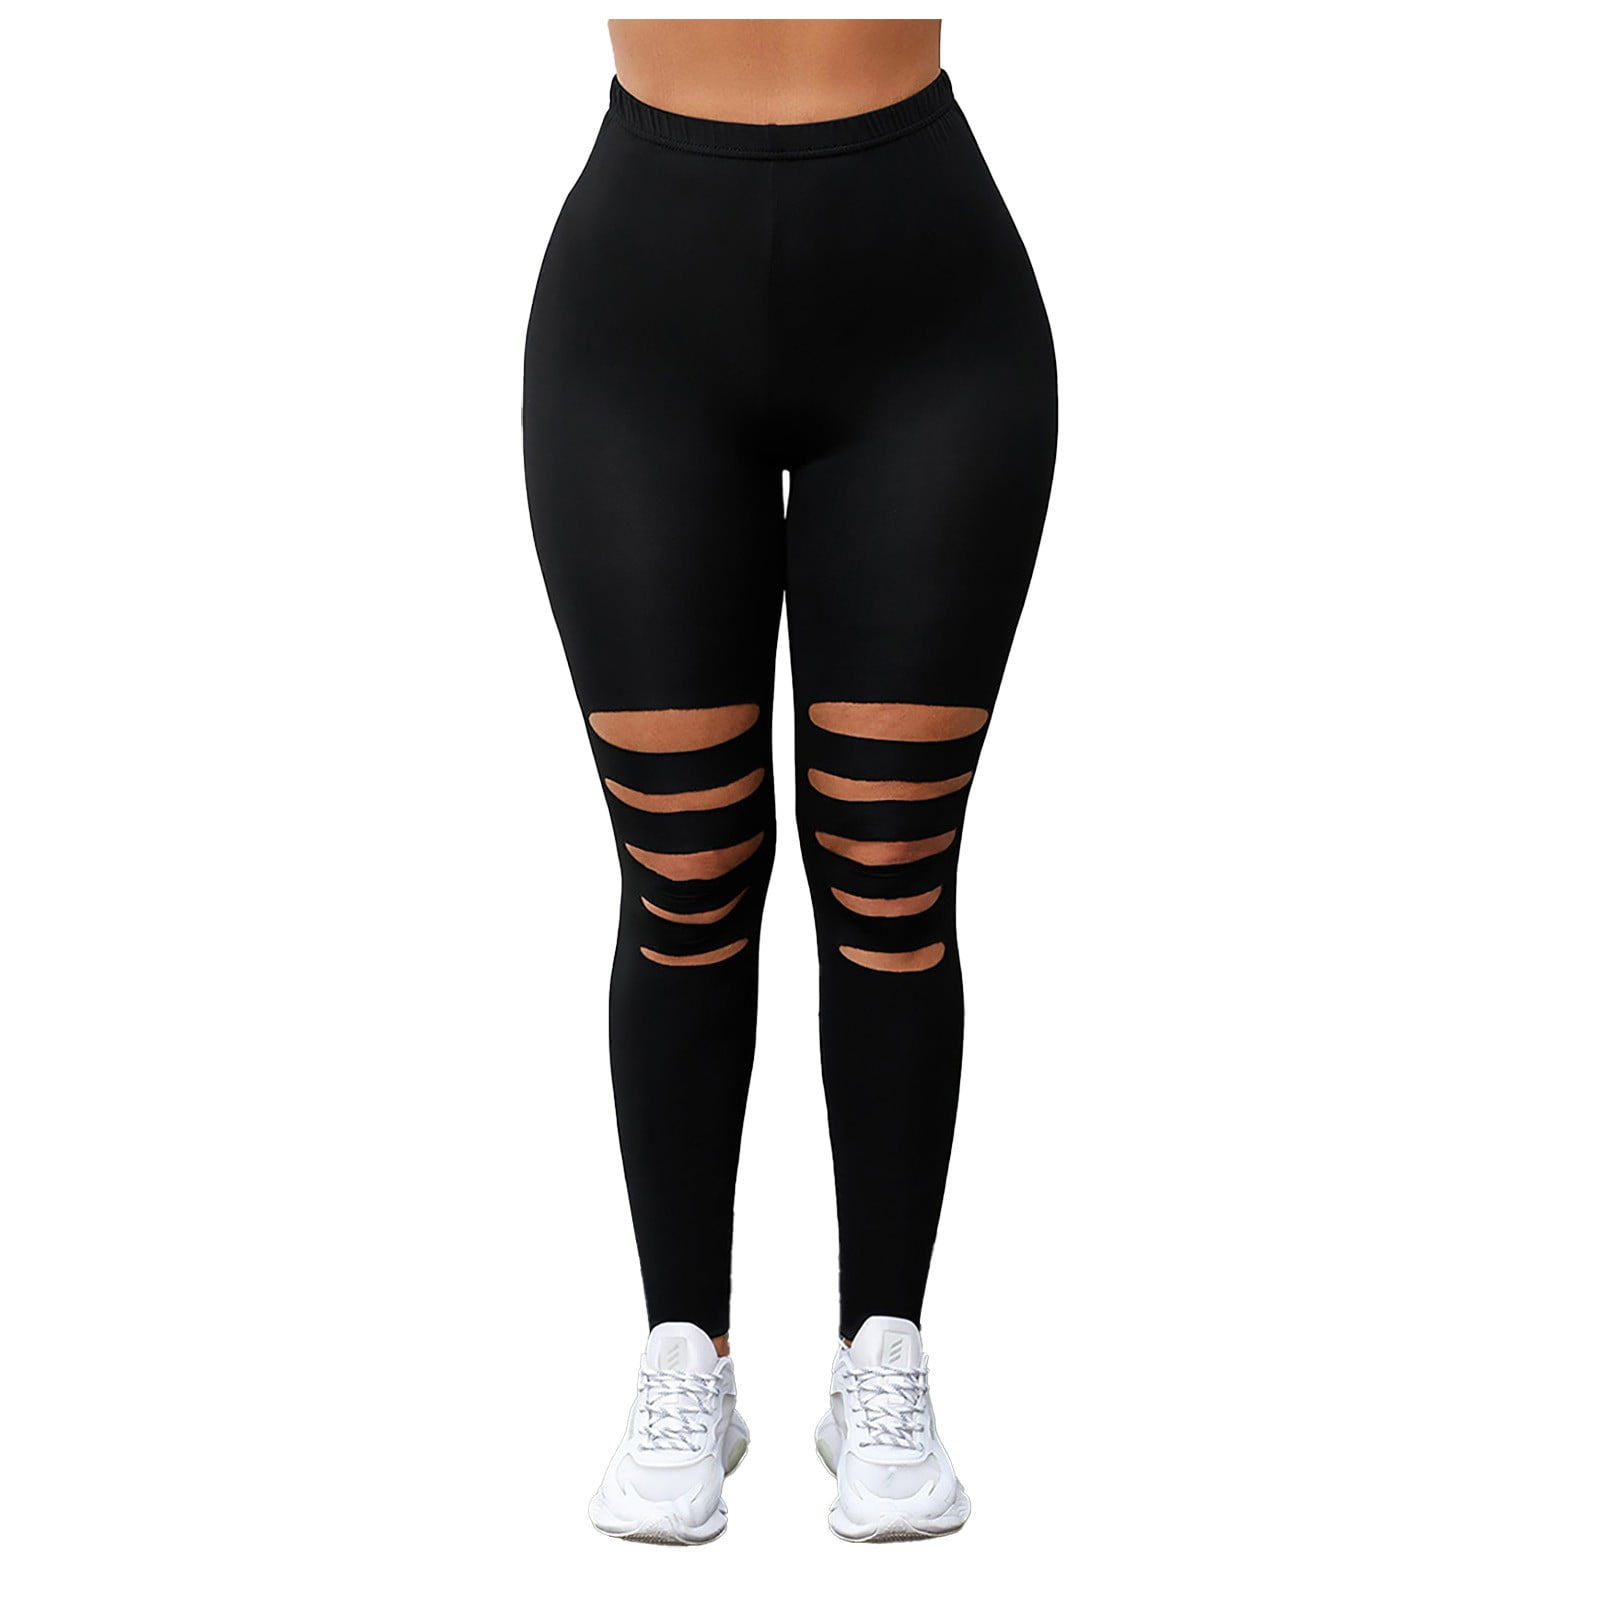 SELONE Plus Size Leggings for Women High Waist Sports with Holes